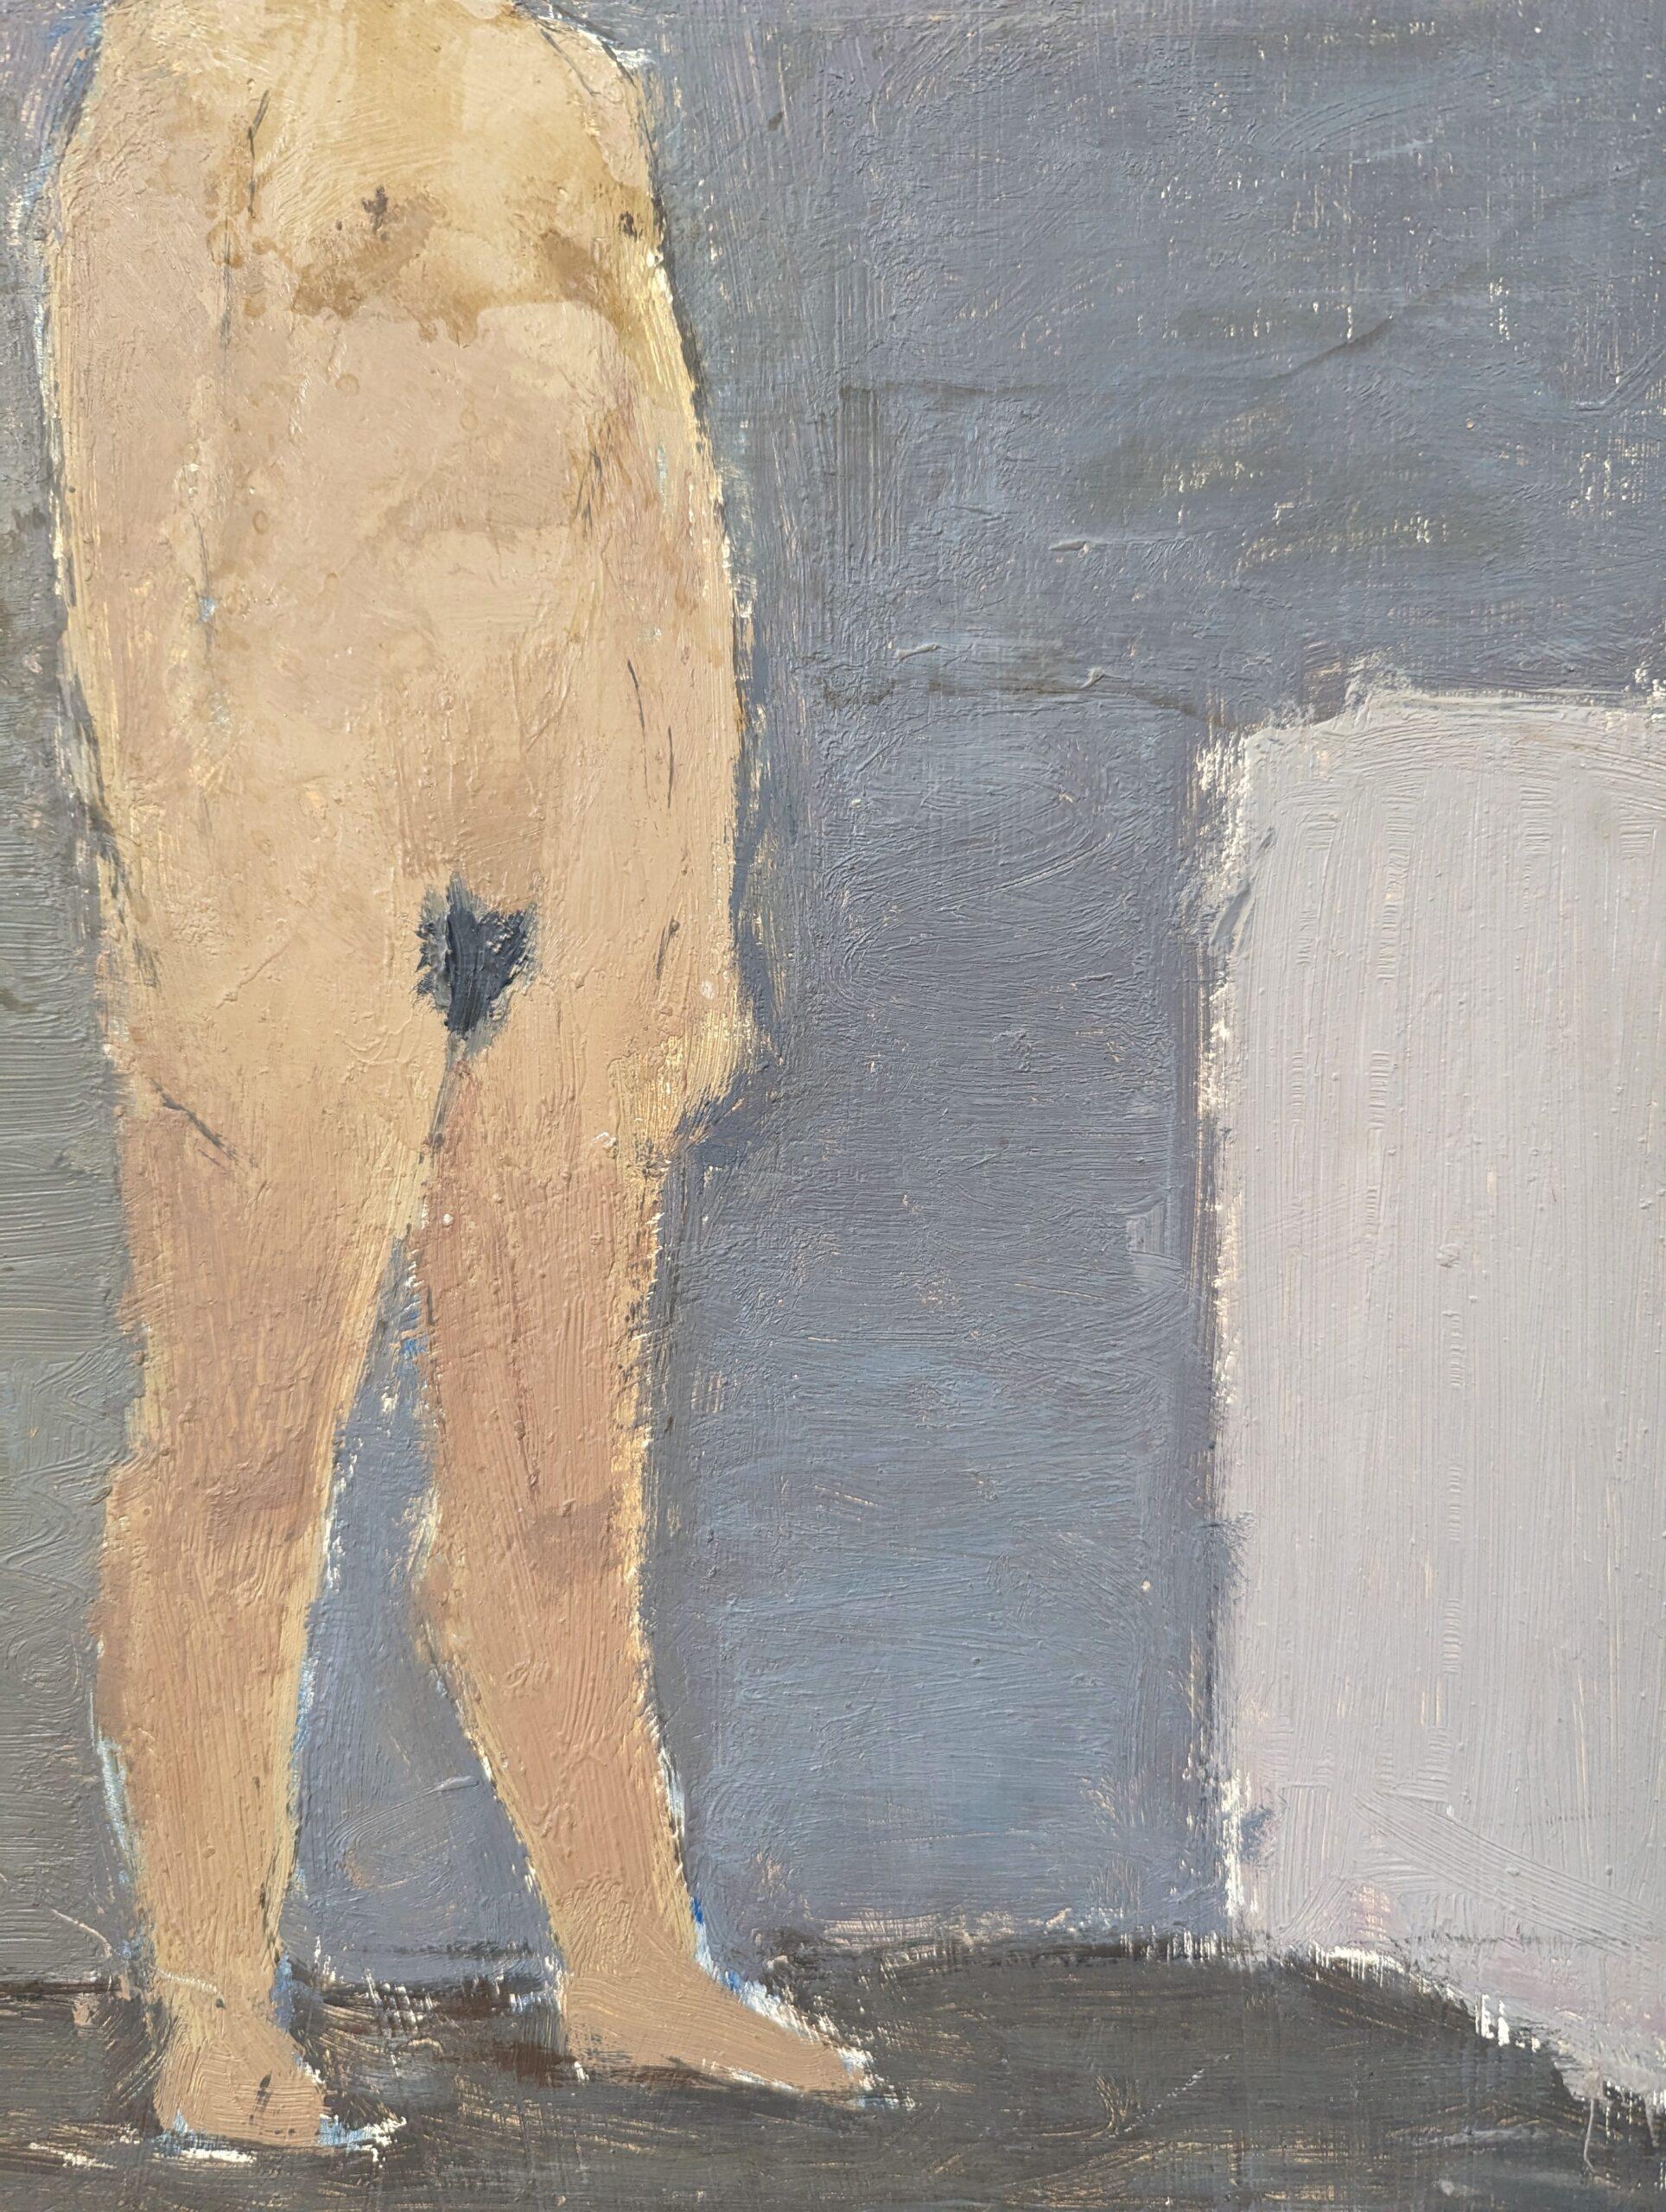 NUDE BY LAVENDER
Size: 40.5 x 33.5 cm
Oil on board

A gentle and emotive mid-century vintage oil portrait, executed in oil onto board and dated 1943-1946 on reverse.

A standing nude figure takes center stage in the composition, as she stands with